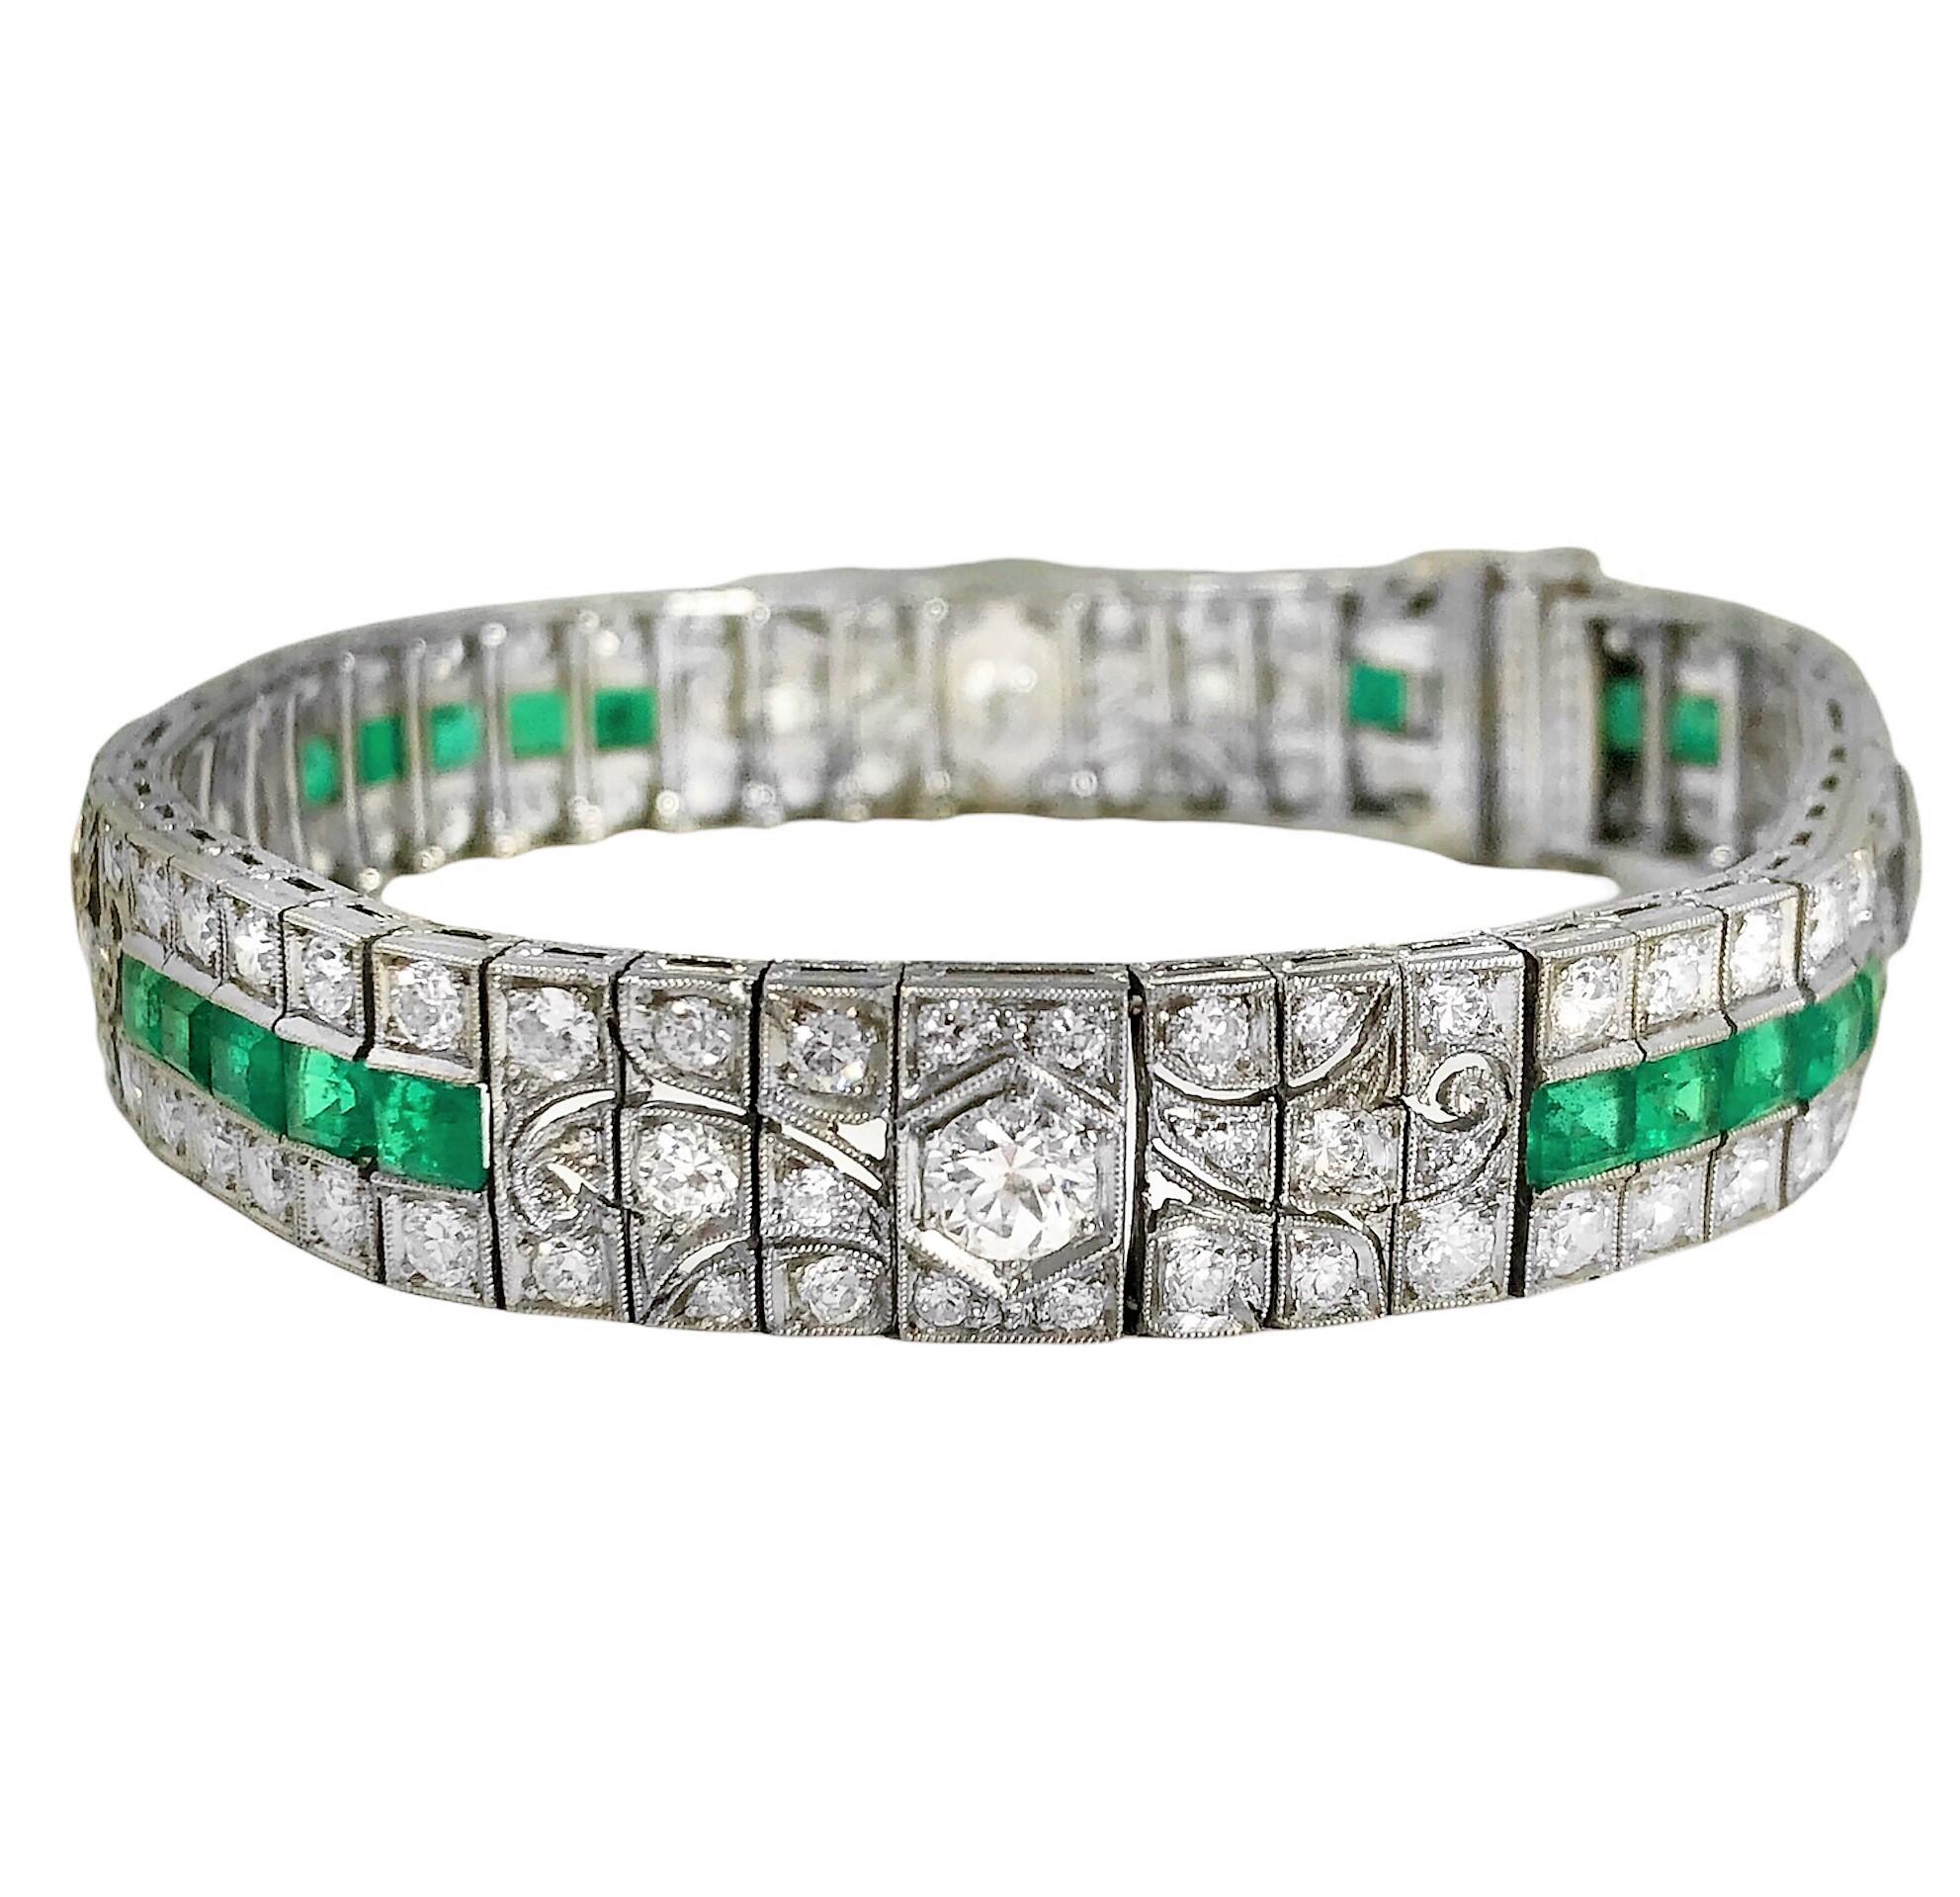 This impeccable Art Deco period bracelet is set with Old European cut diamonds and with a vivid strip of fine emeralds. The diamonds weigh an estimated total 8.50ct of overall G/H color and VS2 clarity, and the assorted emeralds weigh an approximate